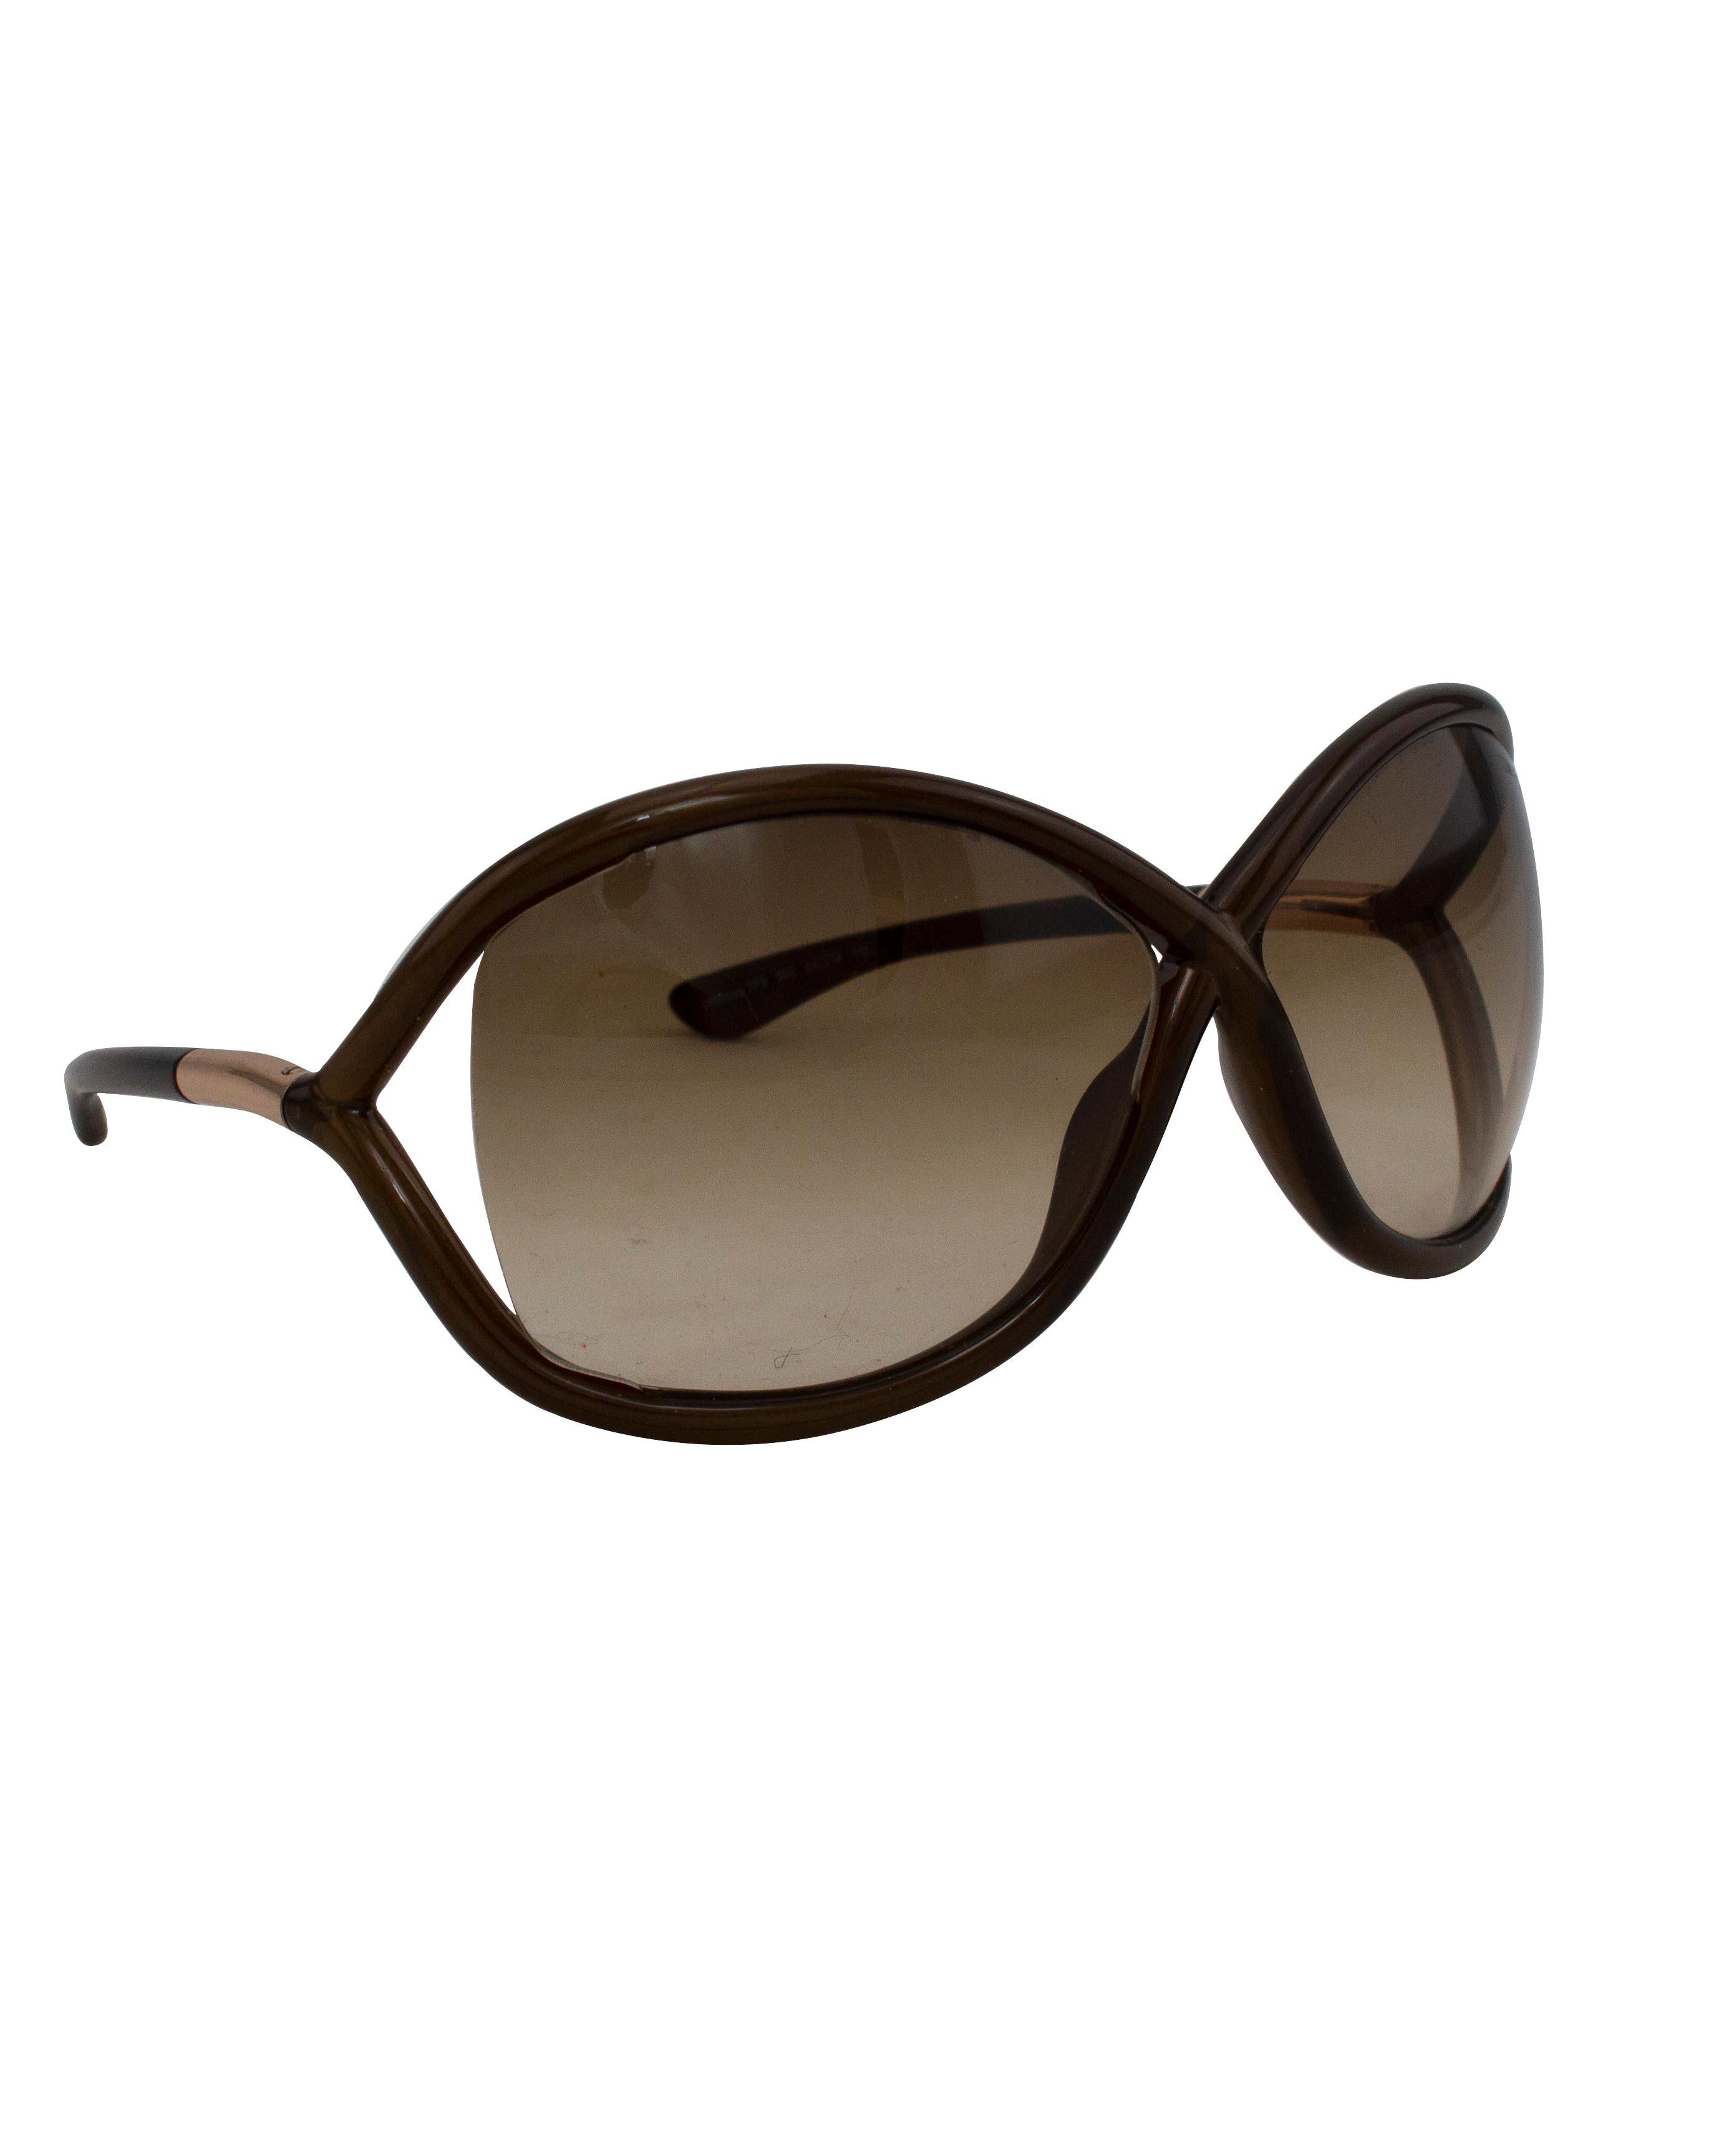 Tom Ford Dark Brown Whitney Sunglasses In Excellent Condition For Sale In Toronto, Ontario